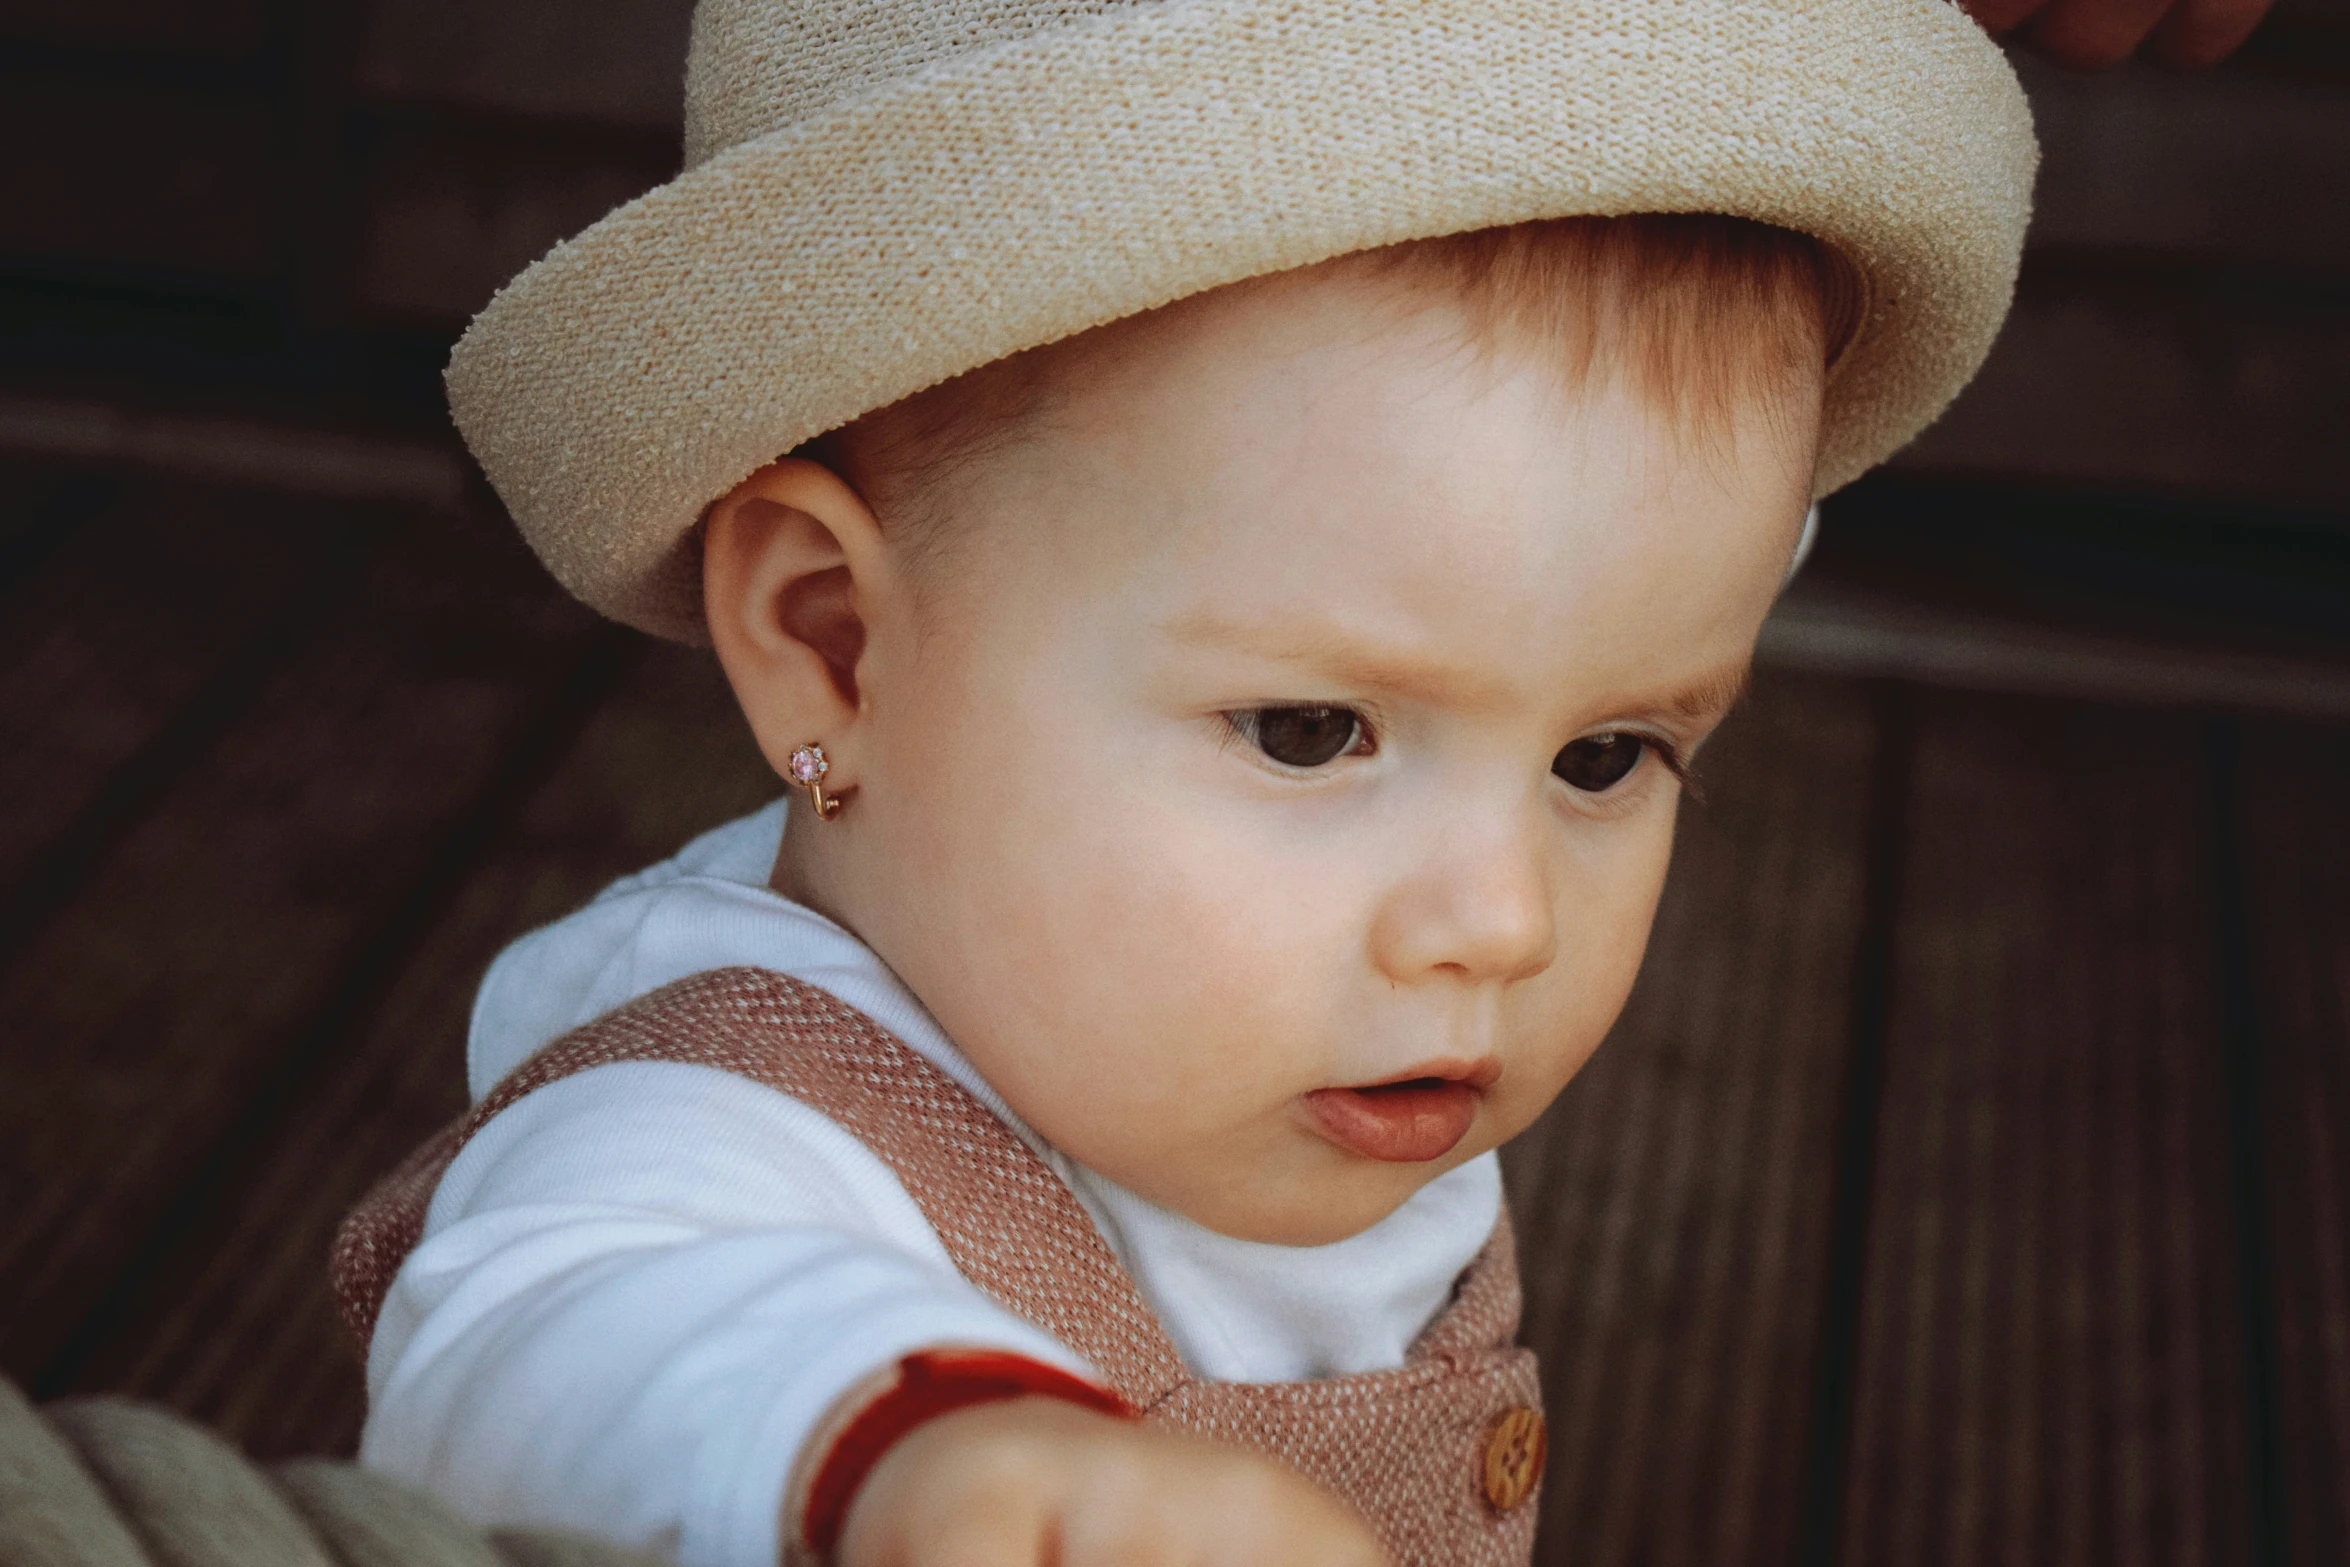 a small child wearing a tan hat looking at the camera